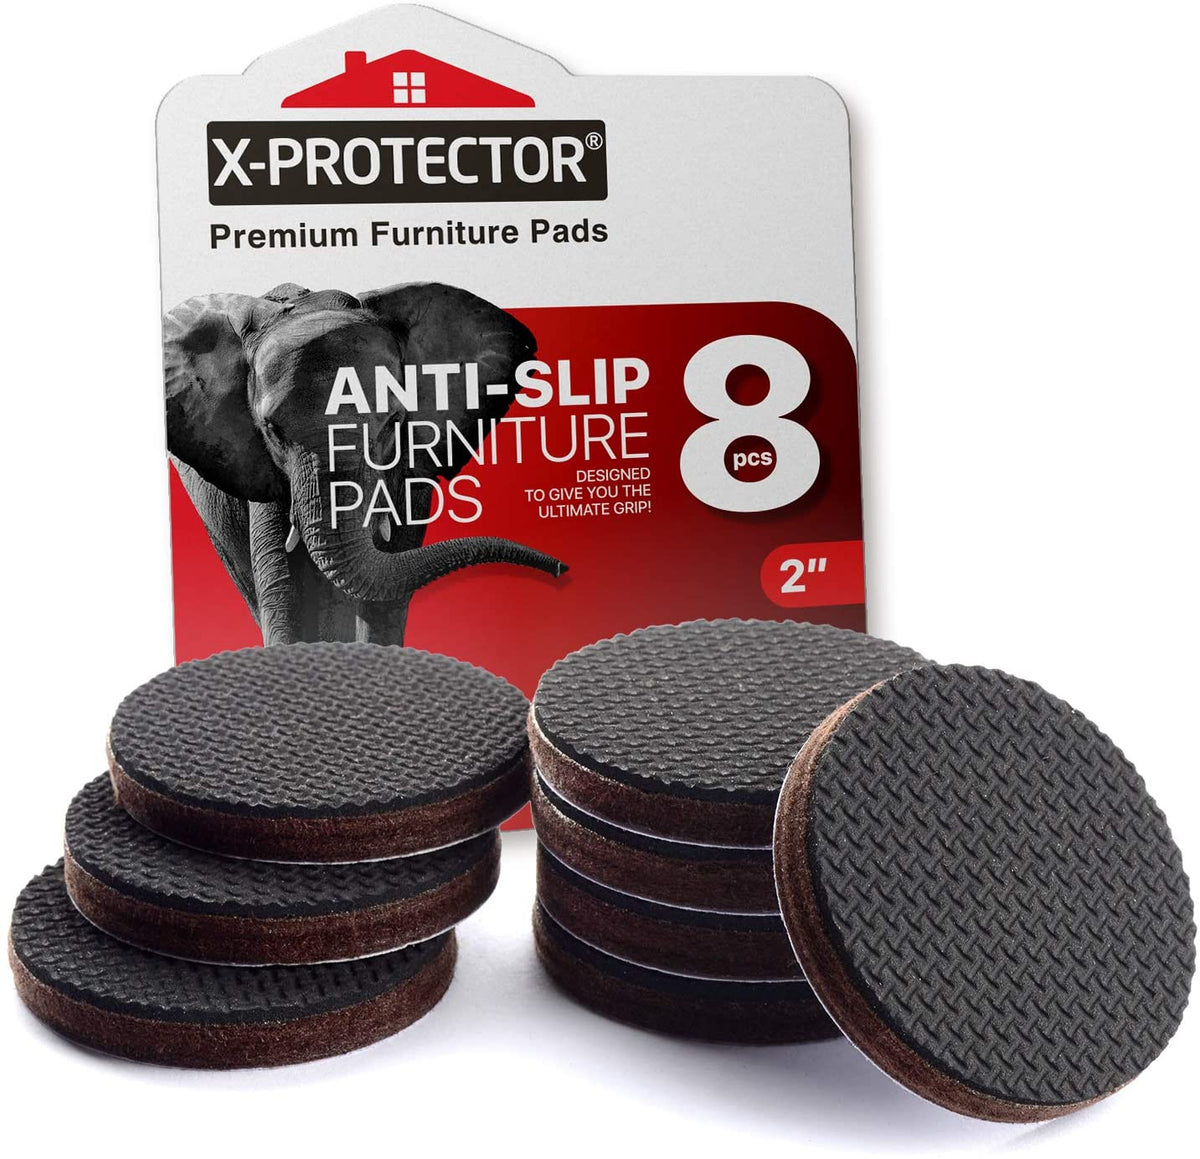 Buy Non-Slip Rubber Sheets - Anti-Slip & Anti-Skid Products from